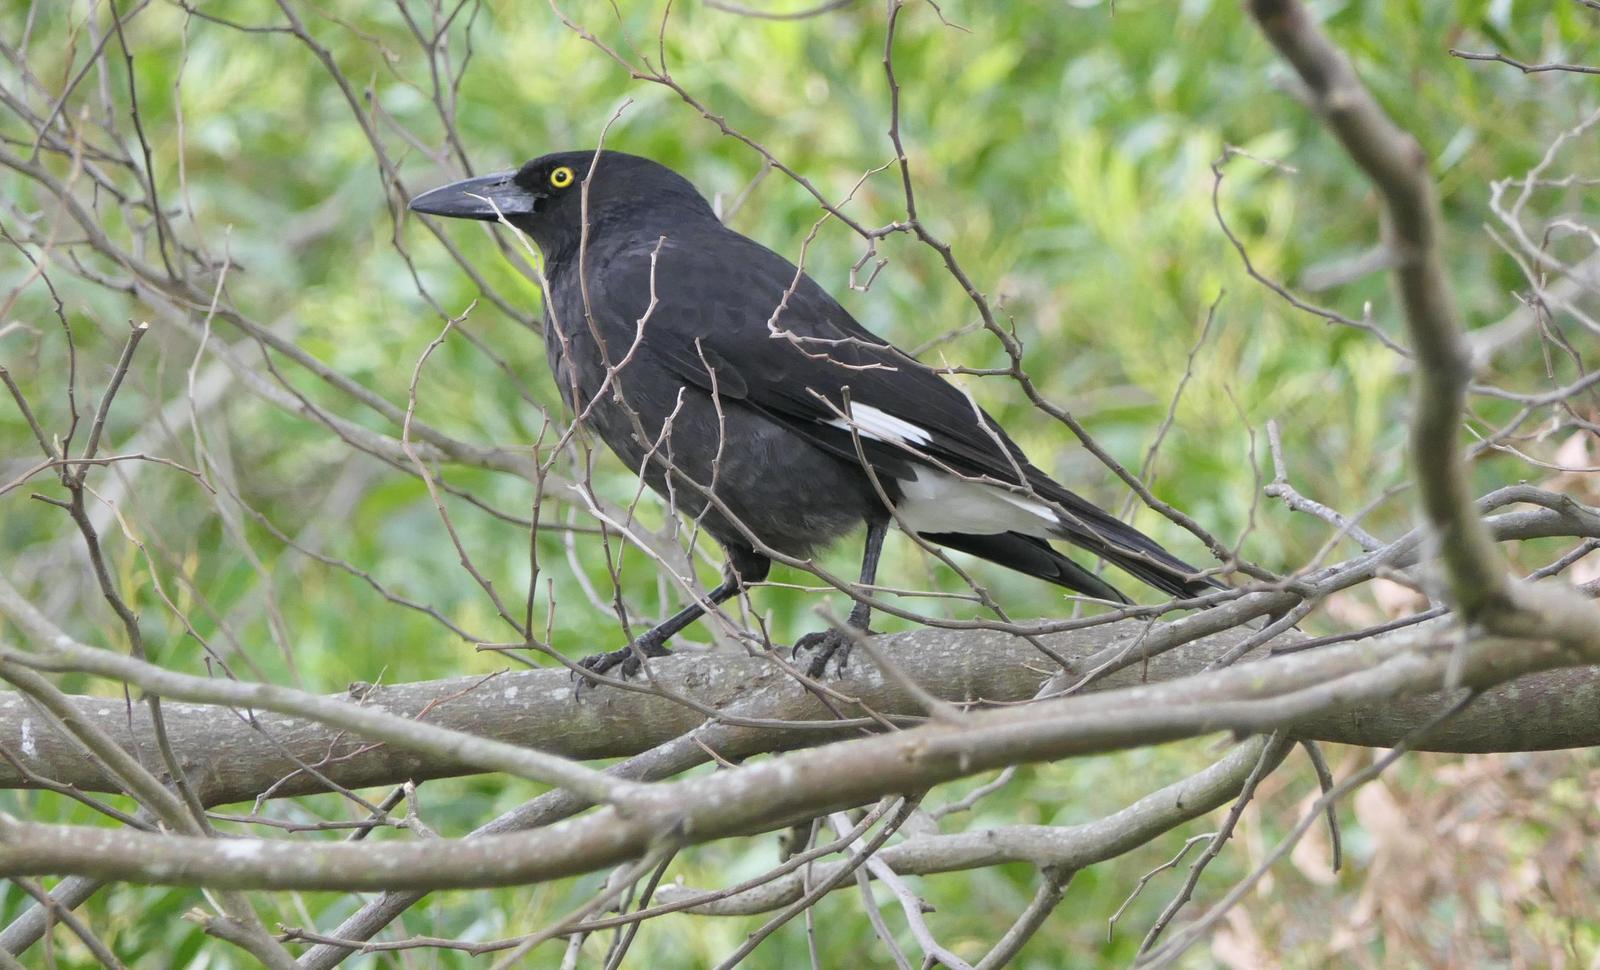 Pied Currawong Photo by Randy Siebert